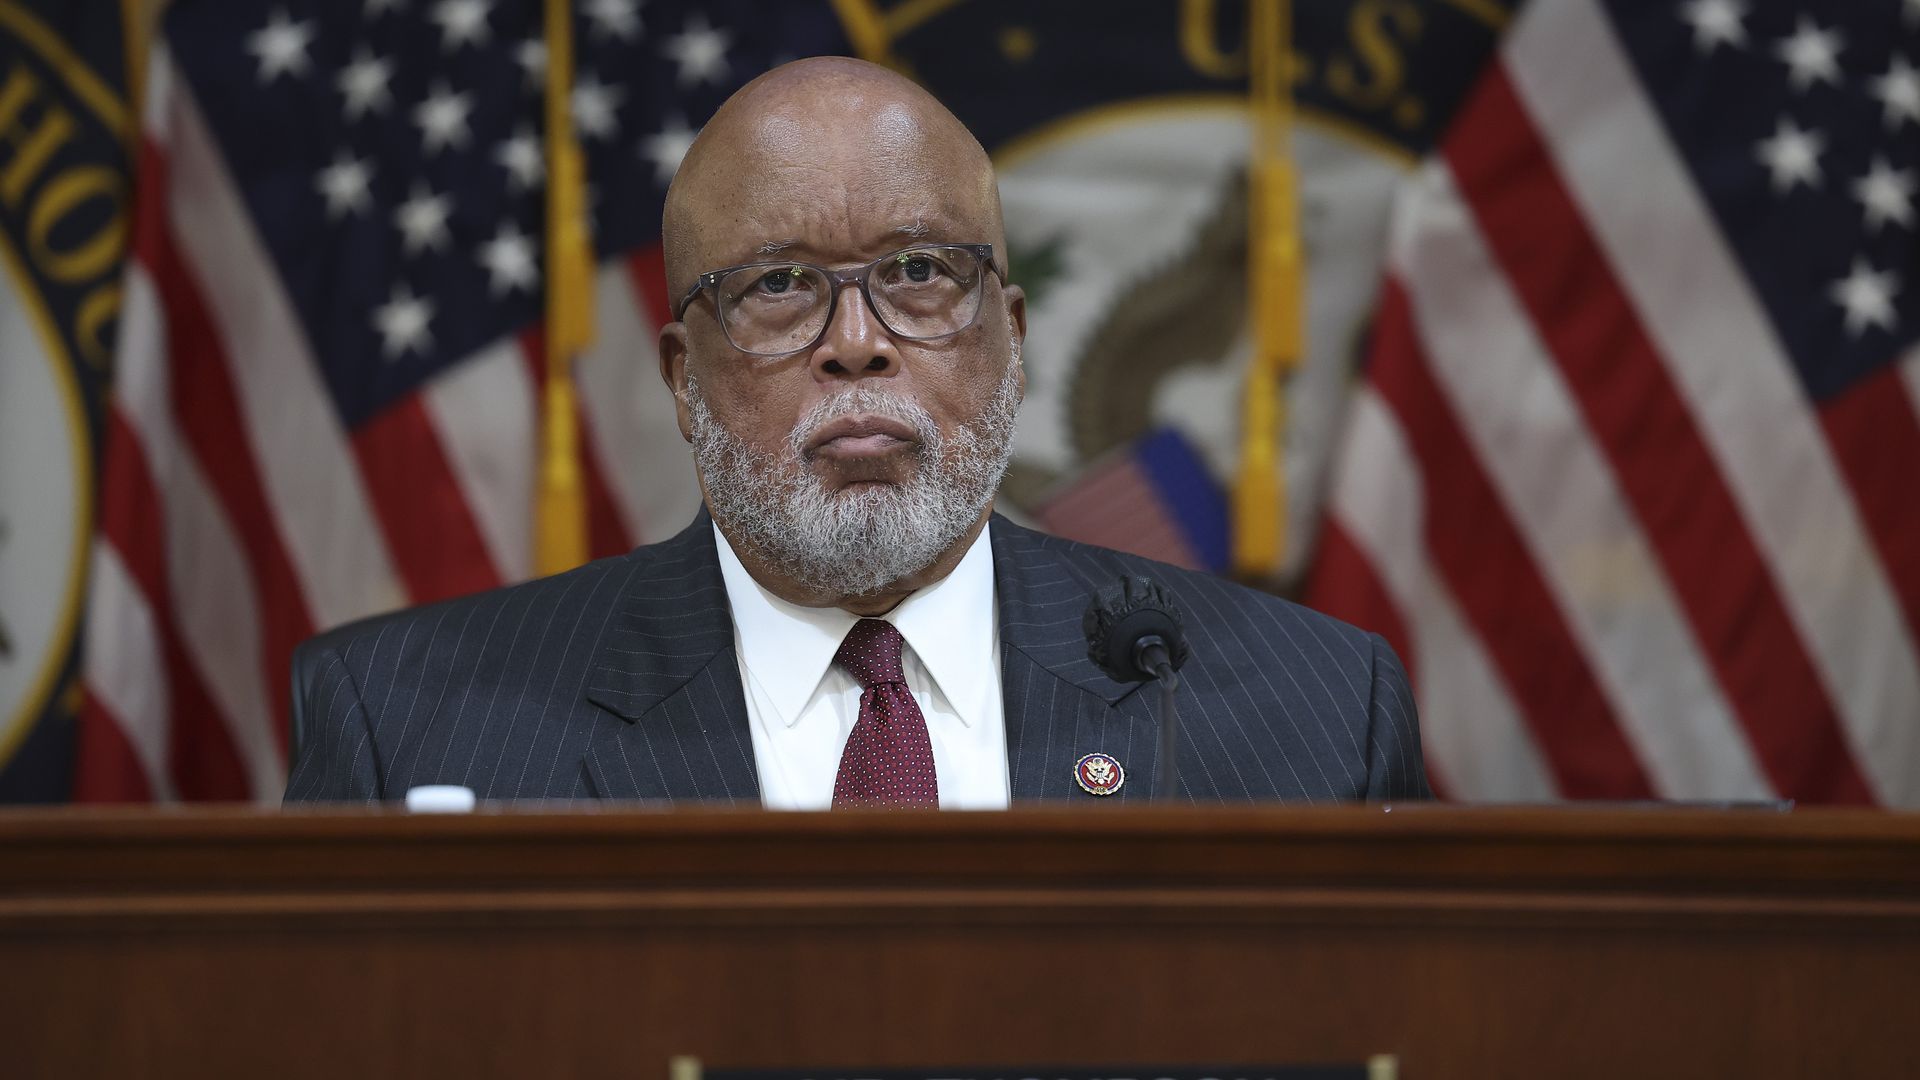 U.S. Rep. Bennie Thompson (D-MS), Chair of the House Select Committee to Investigate the January 6th Attack on the U.S. Capitol, delivers remarks.